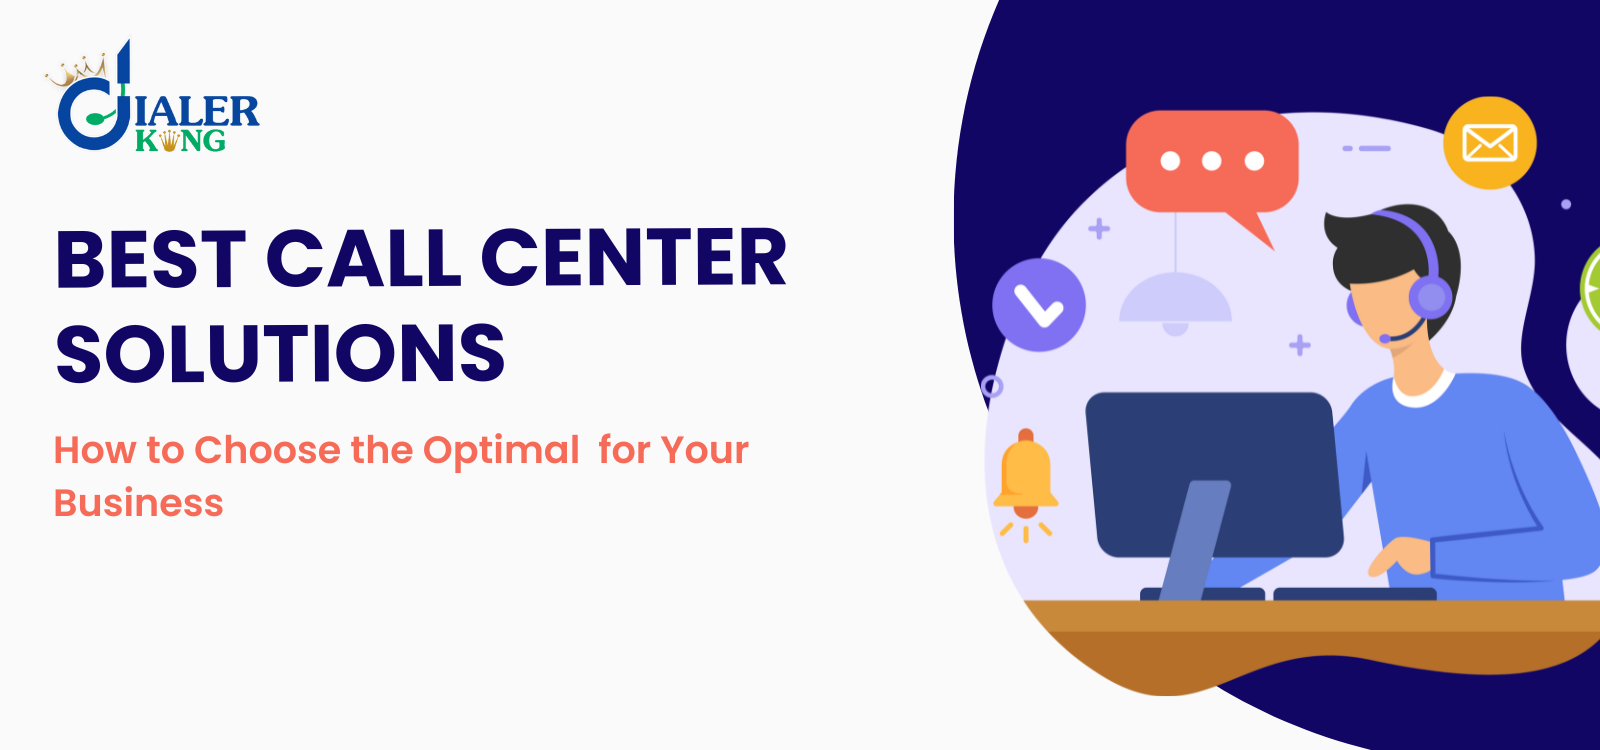 Best Call Center Solutions - How to Choose the Optimal for Your Business